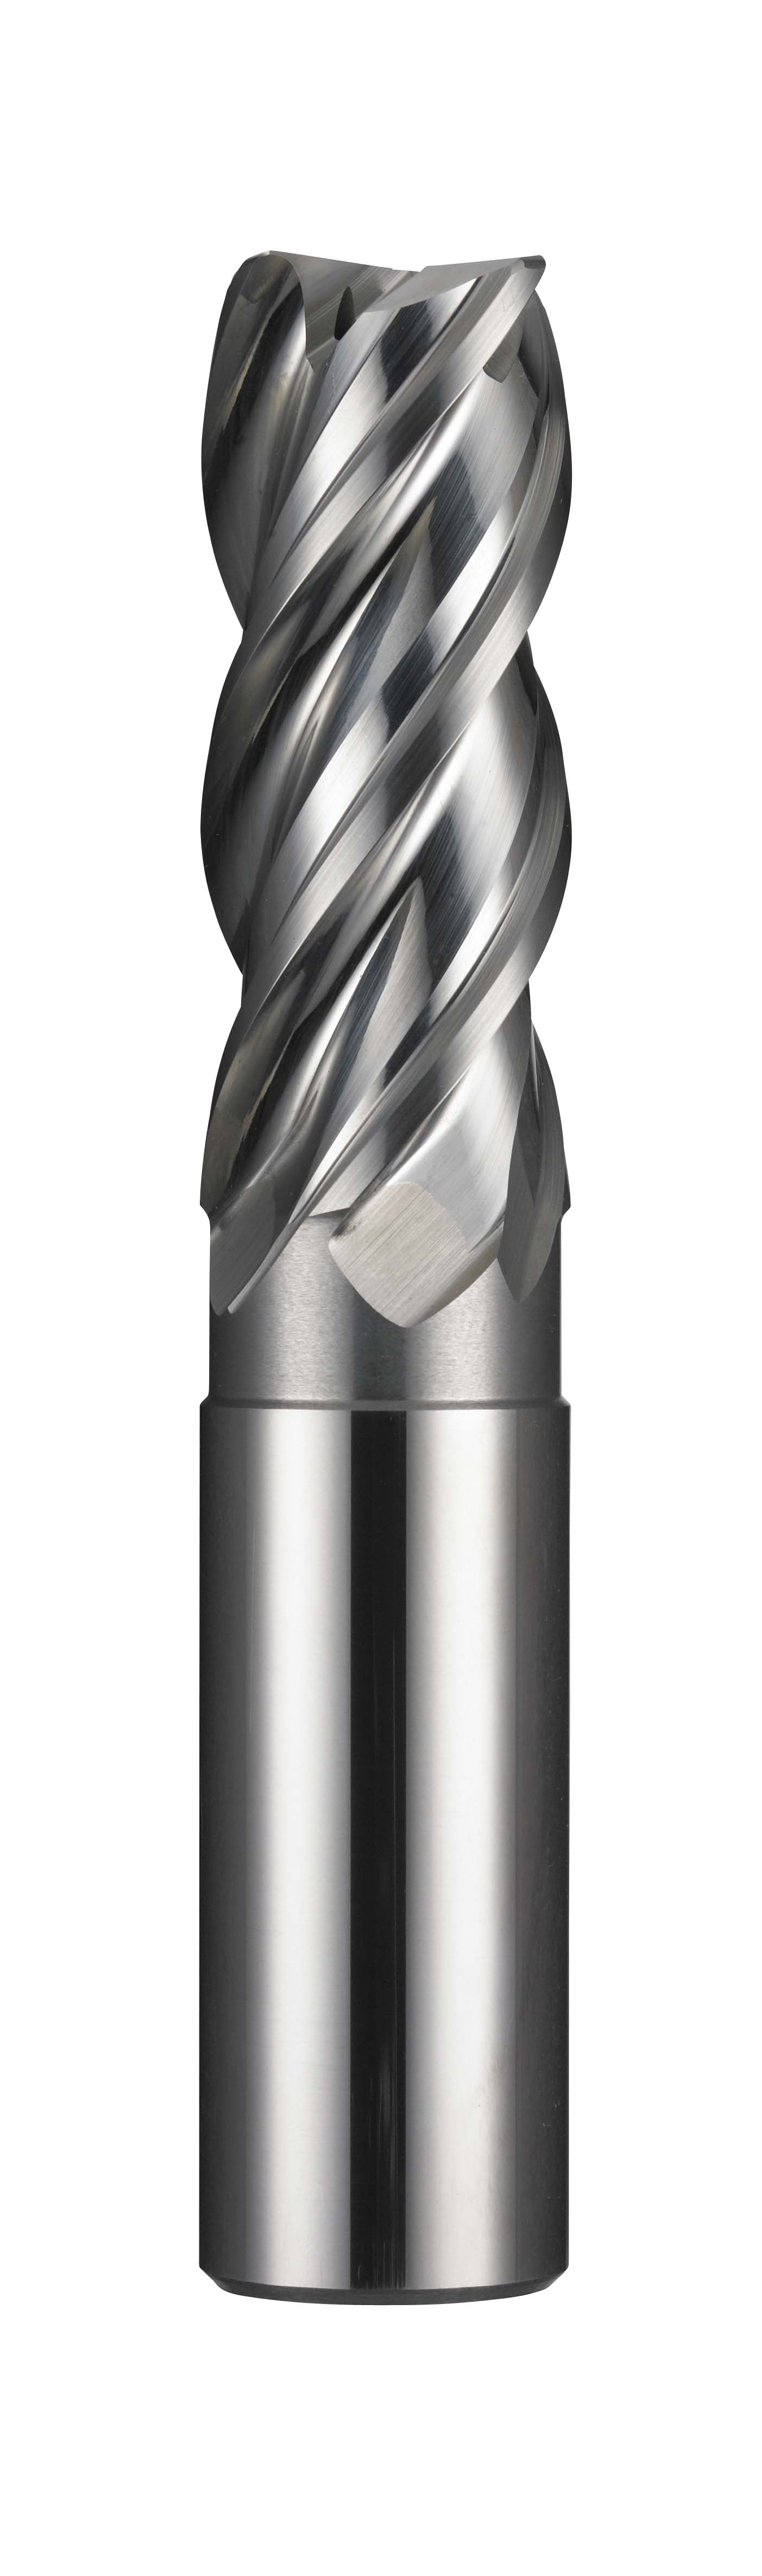 10.00mm Dia, 4 Flute, Square End End Mill - 44629